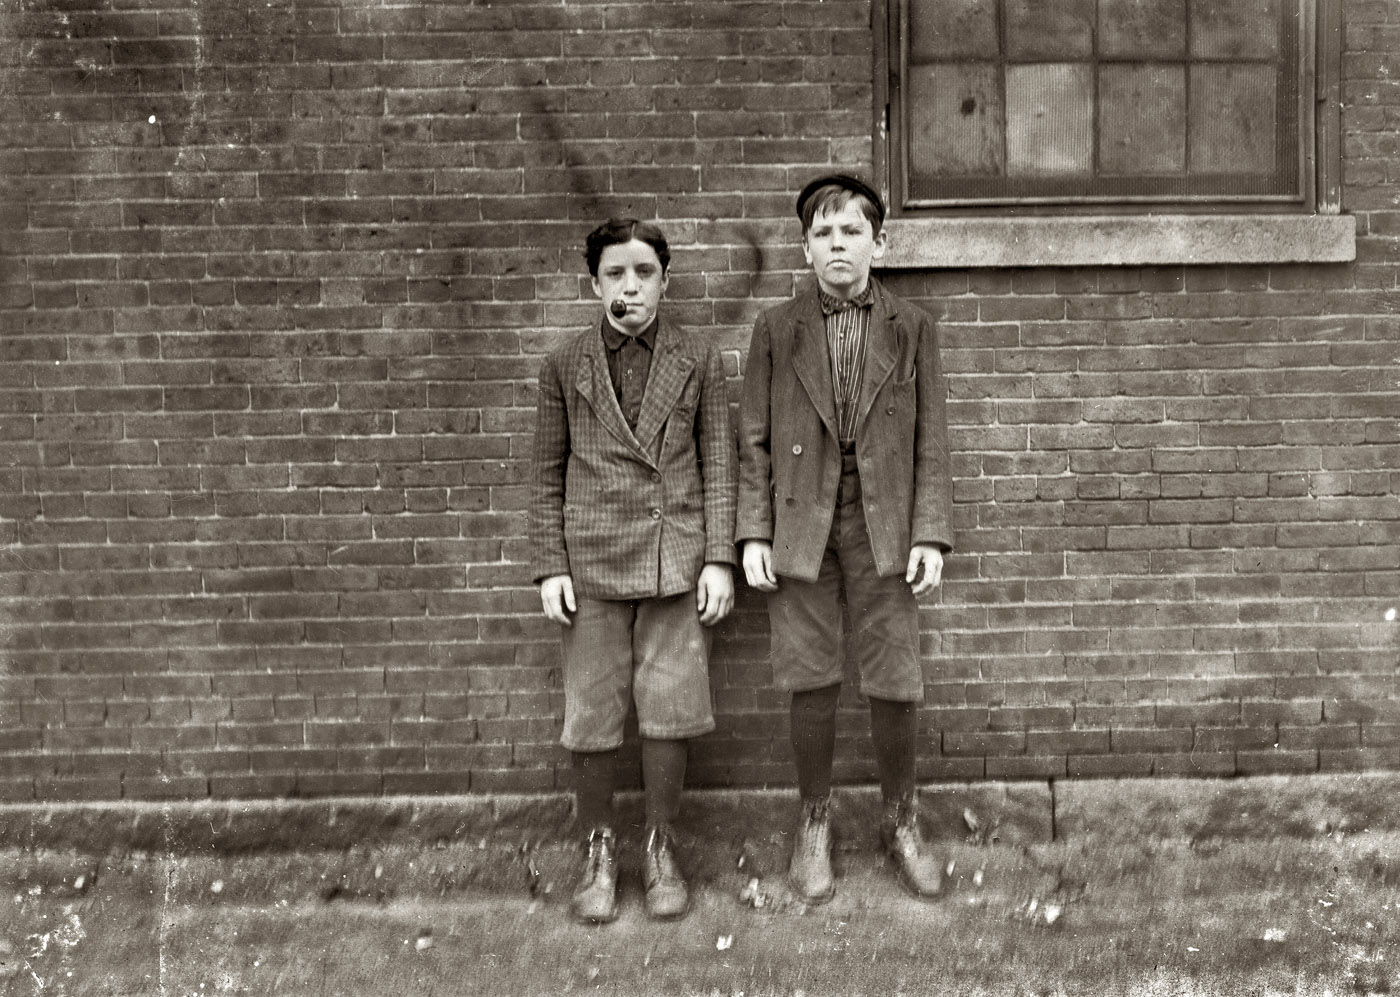 May 1909. Somersworth, New Hampshire. "Lefthand boy Zeke Gosselin, 95 Main Street. Been in mill one year. Other boy Philip Lesard, 68 Elm Street. Been in mill three years. Working in Great Falls Manufacturing Co." View full size.